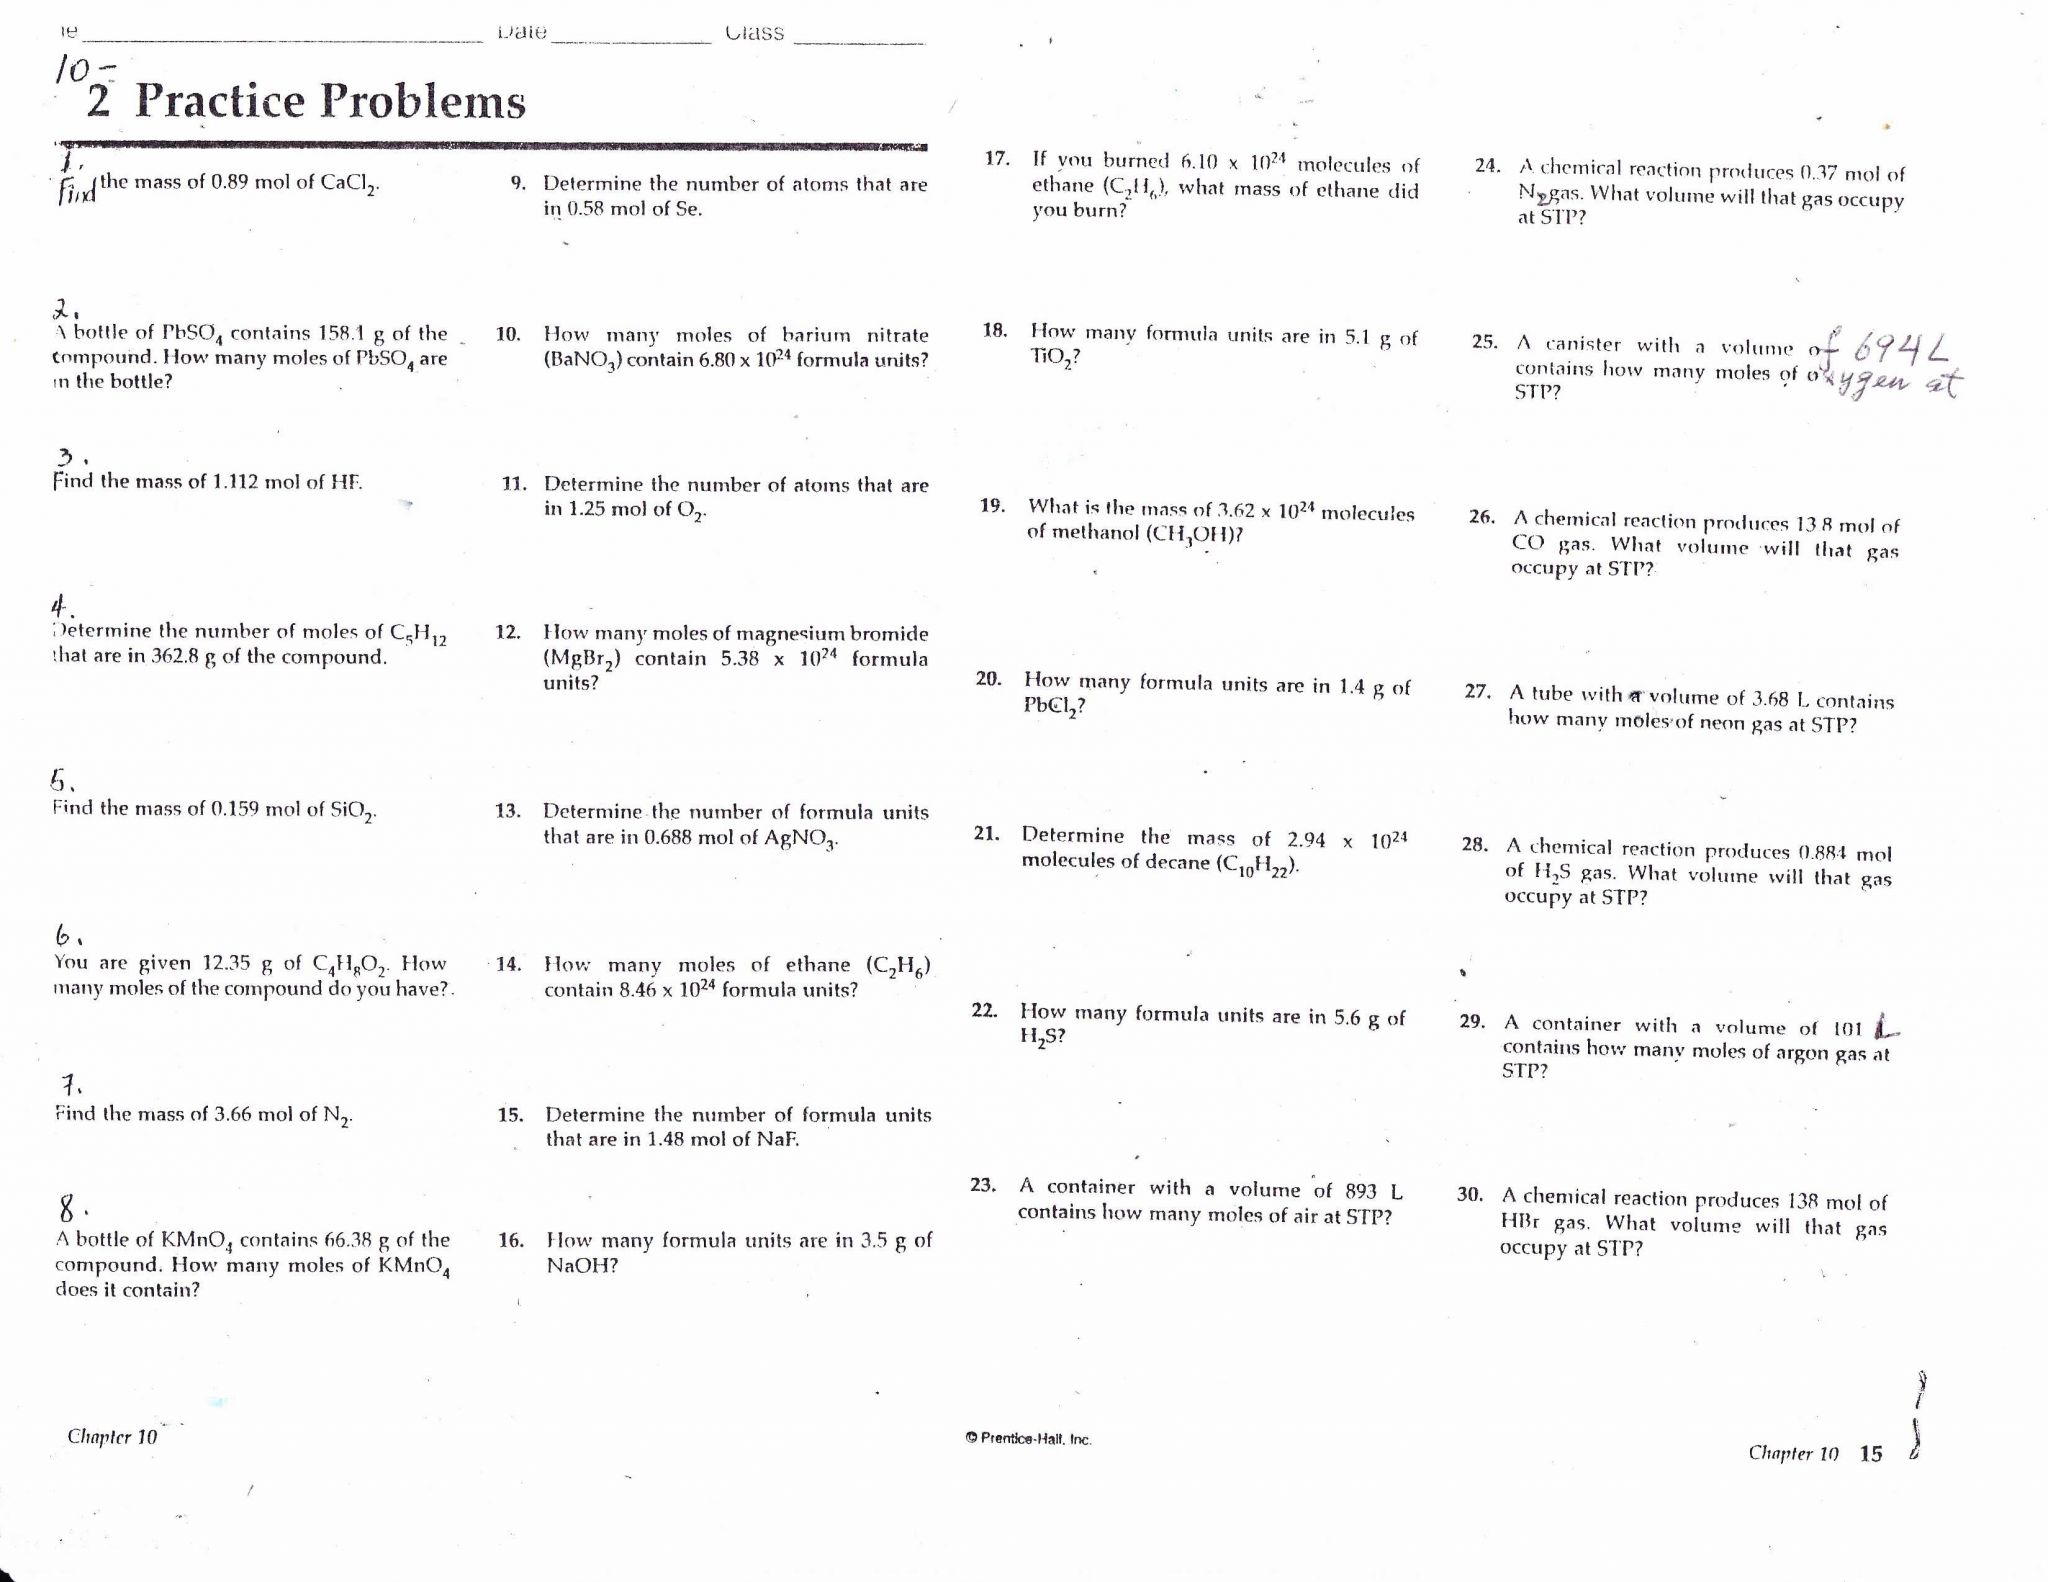 Even Odd or Neither Worksheet Answer Key Also Genetic Practice Problems Worksheet Answers Image Collections